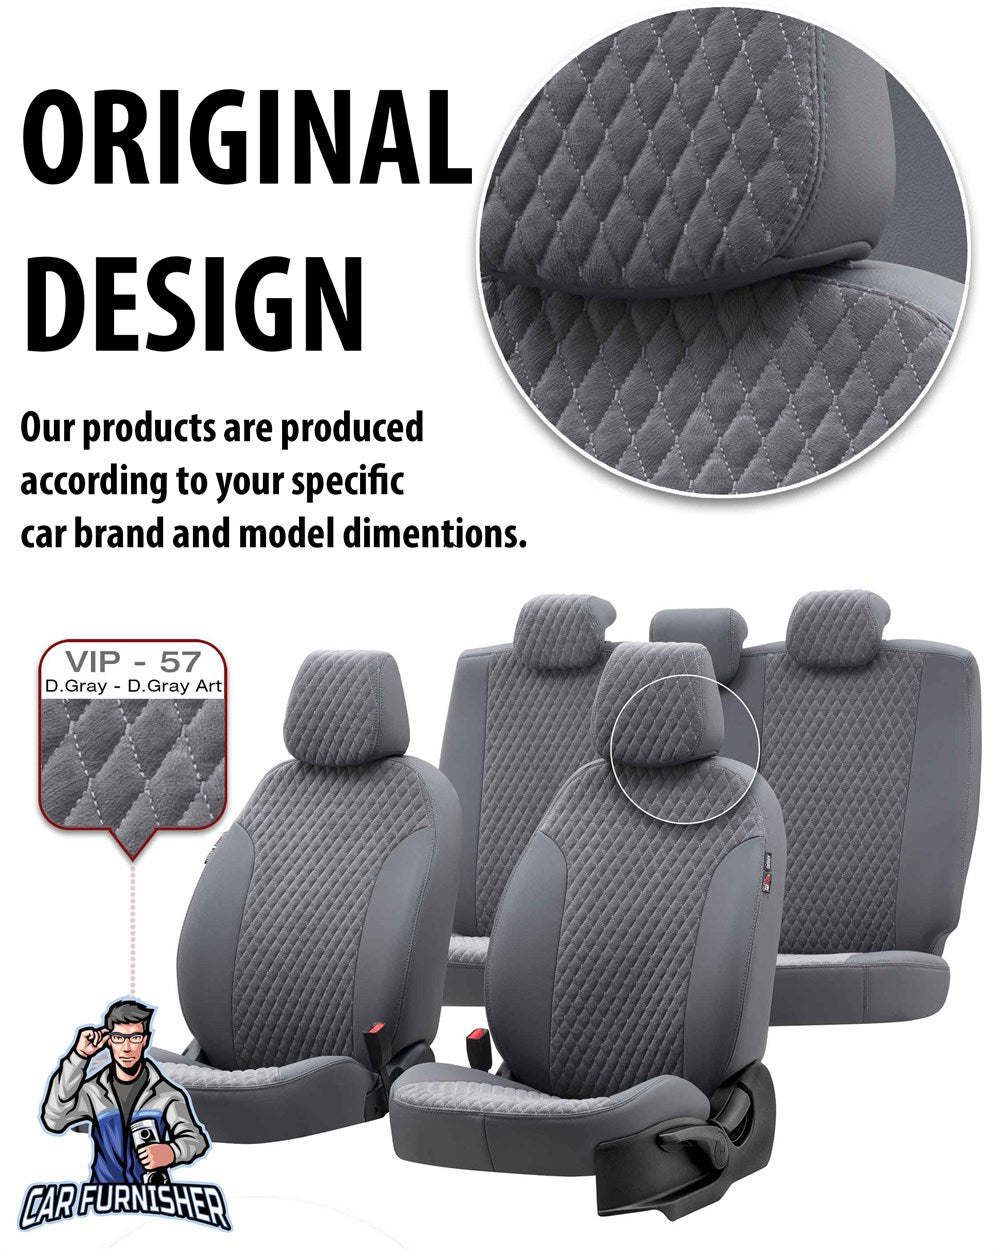 Mitsubishi Colt Seat Covers Amsterdam Foal Feather Design Dark Gray Leather & Foal Feather